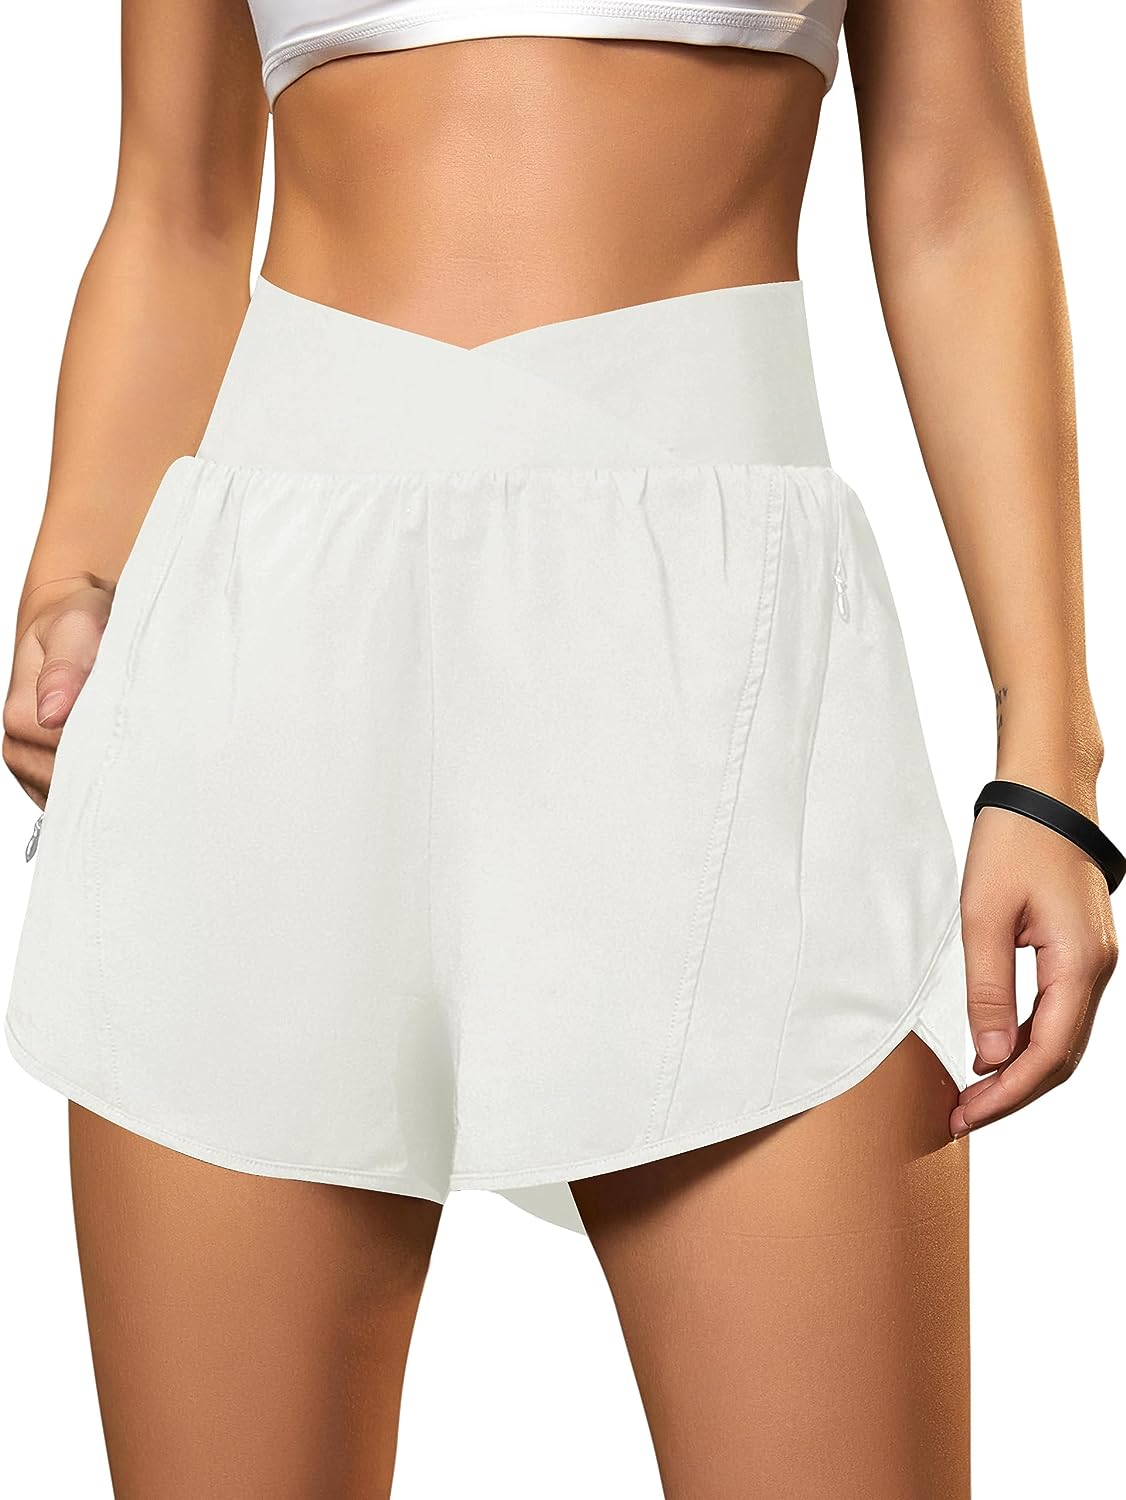  Blooming Jelly Womens High Waisted Running Shorts